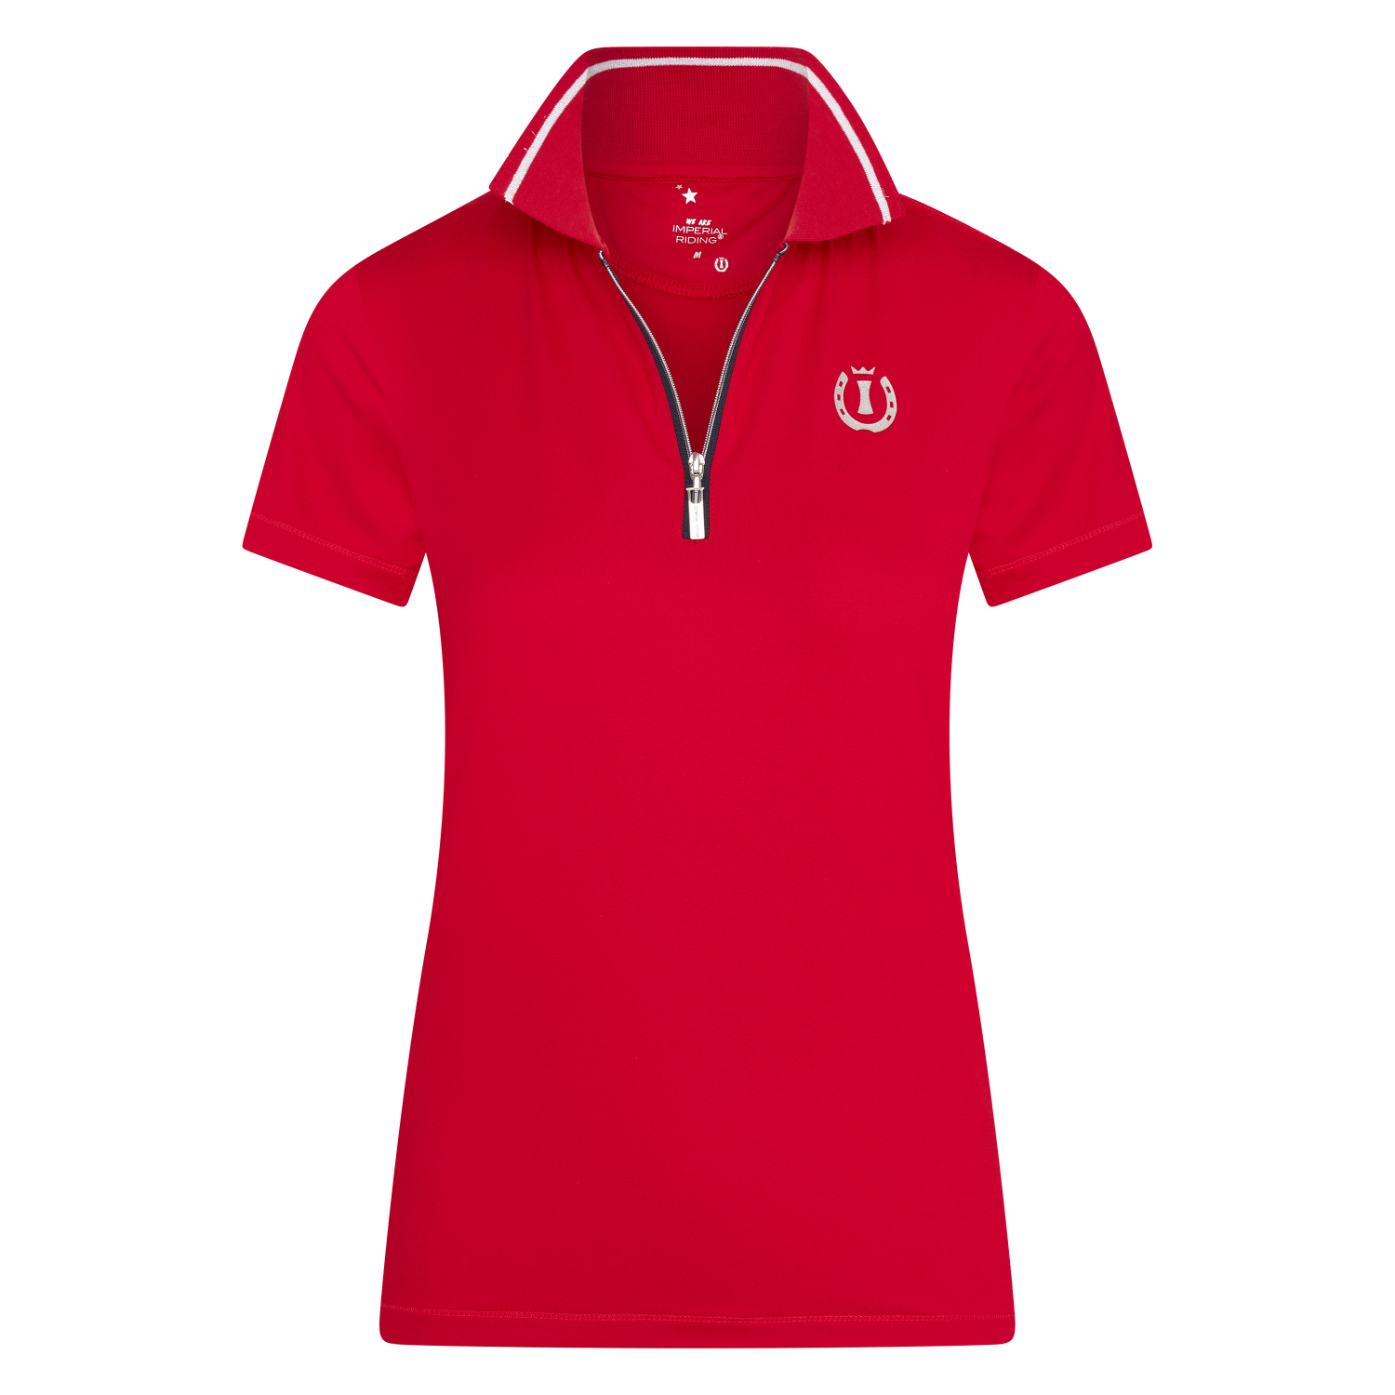 Imperial Riding Polo shirt irhruby